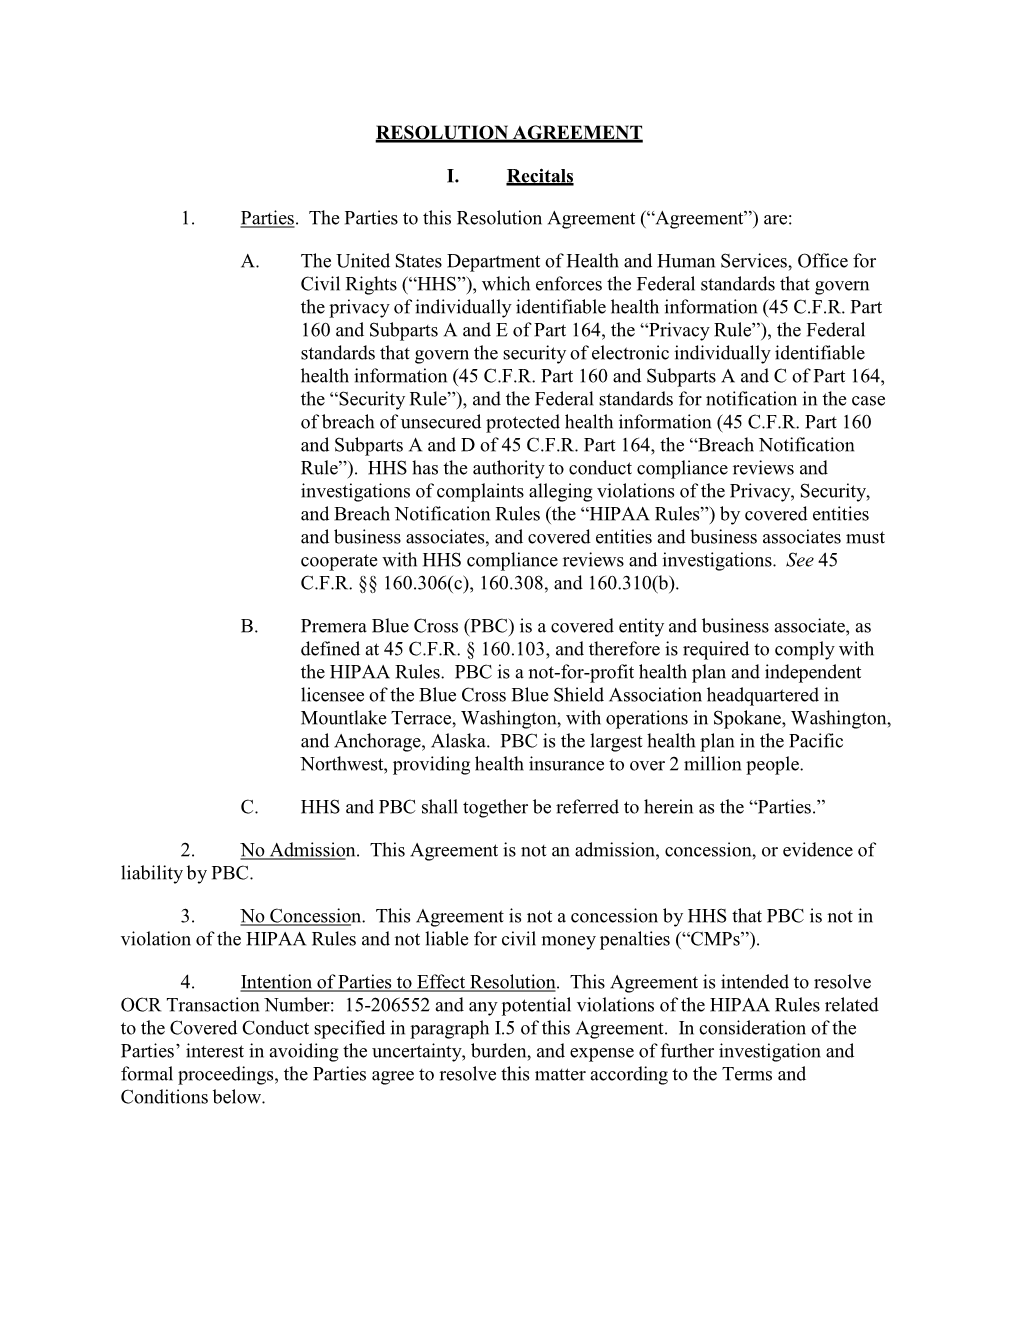 Premera Resolution Agreement and Corrective Action Plan